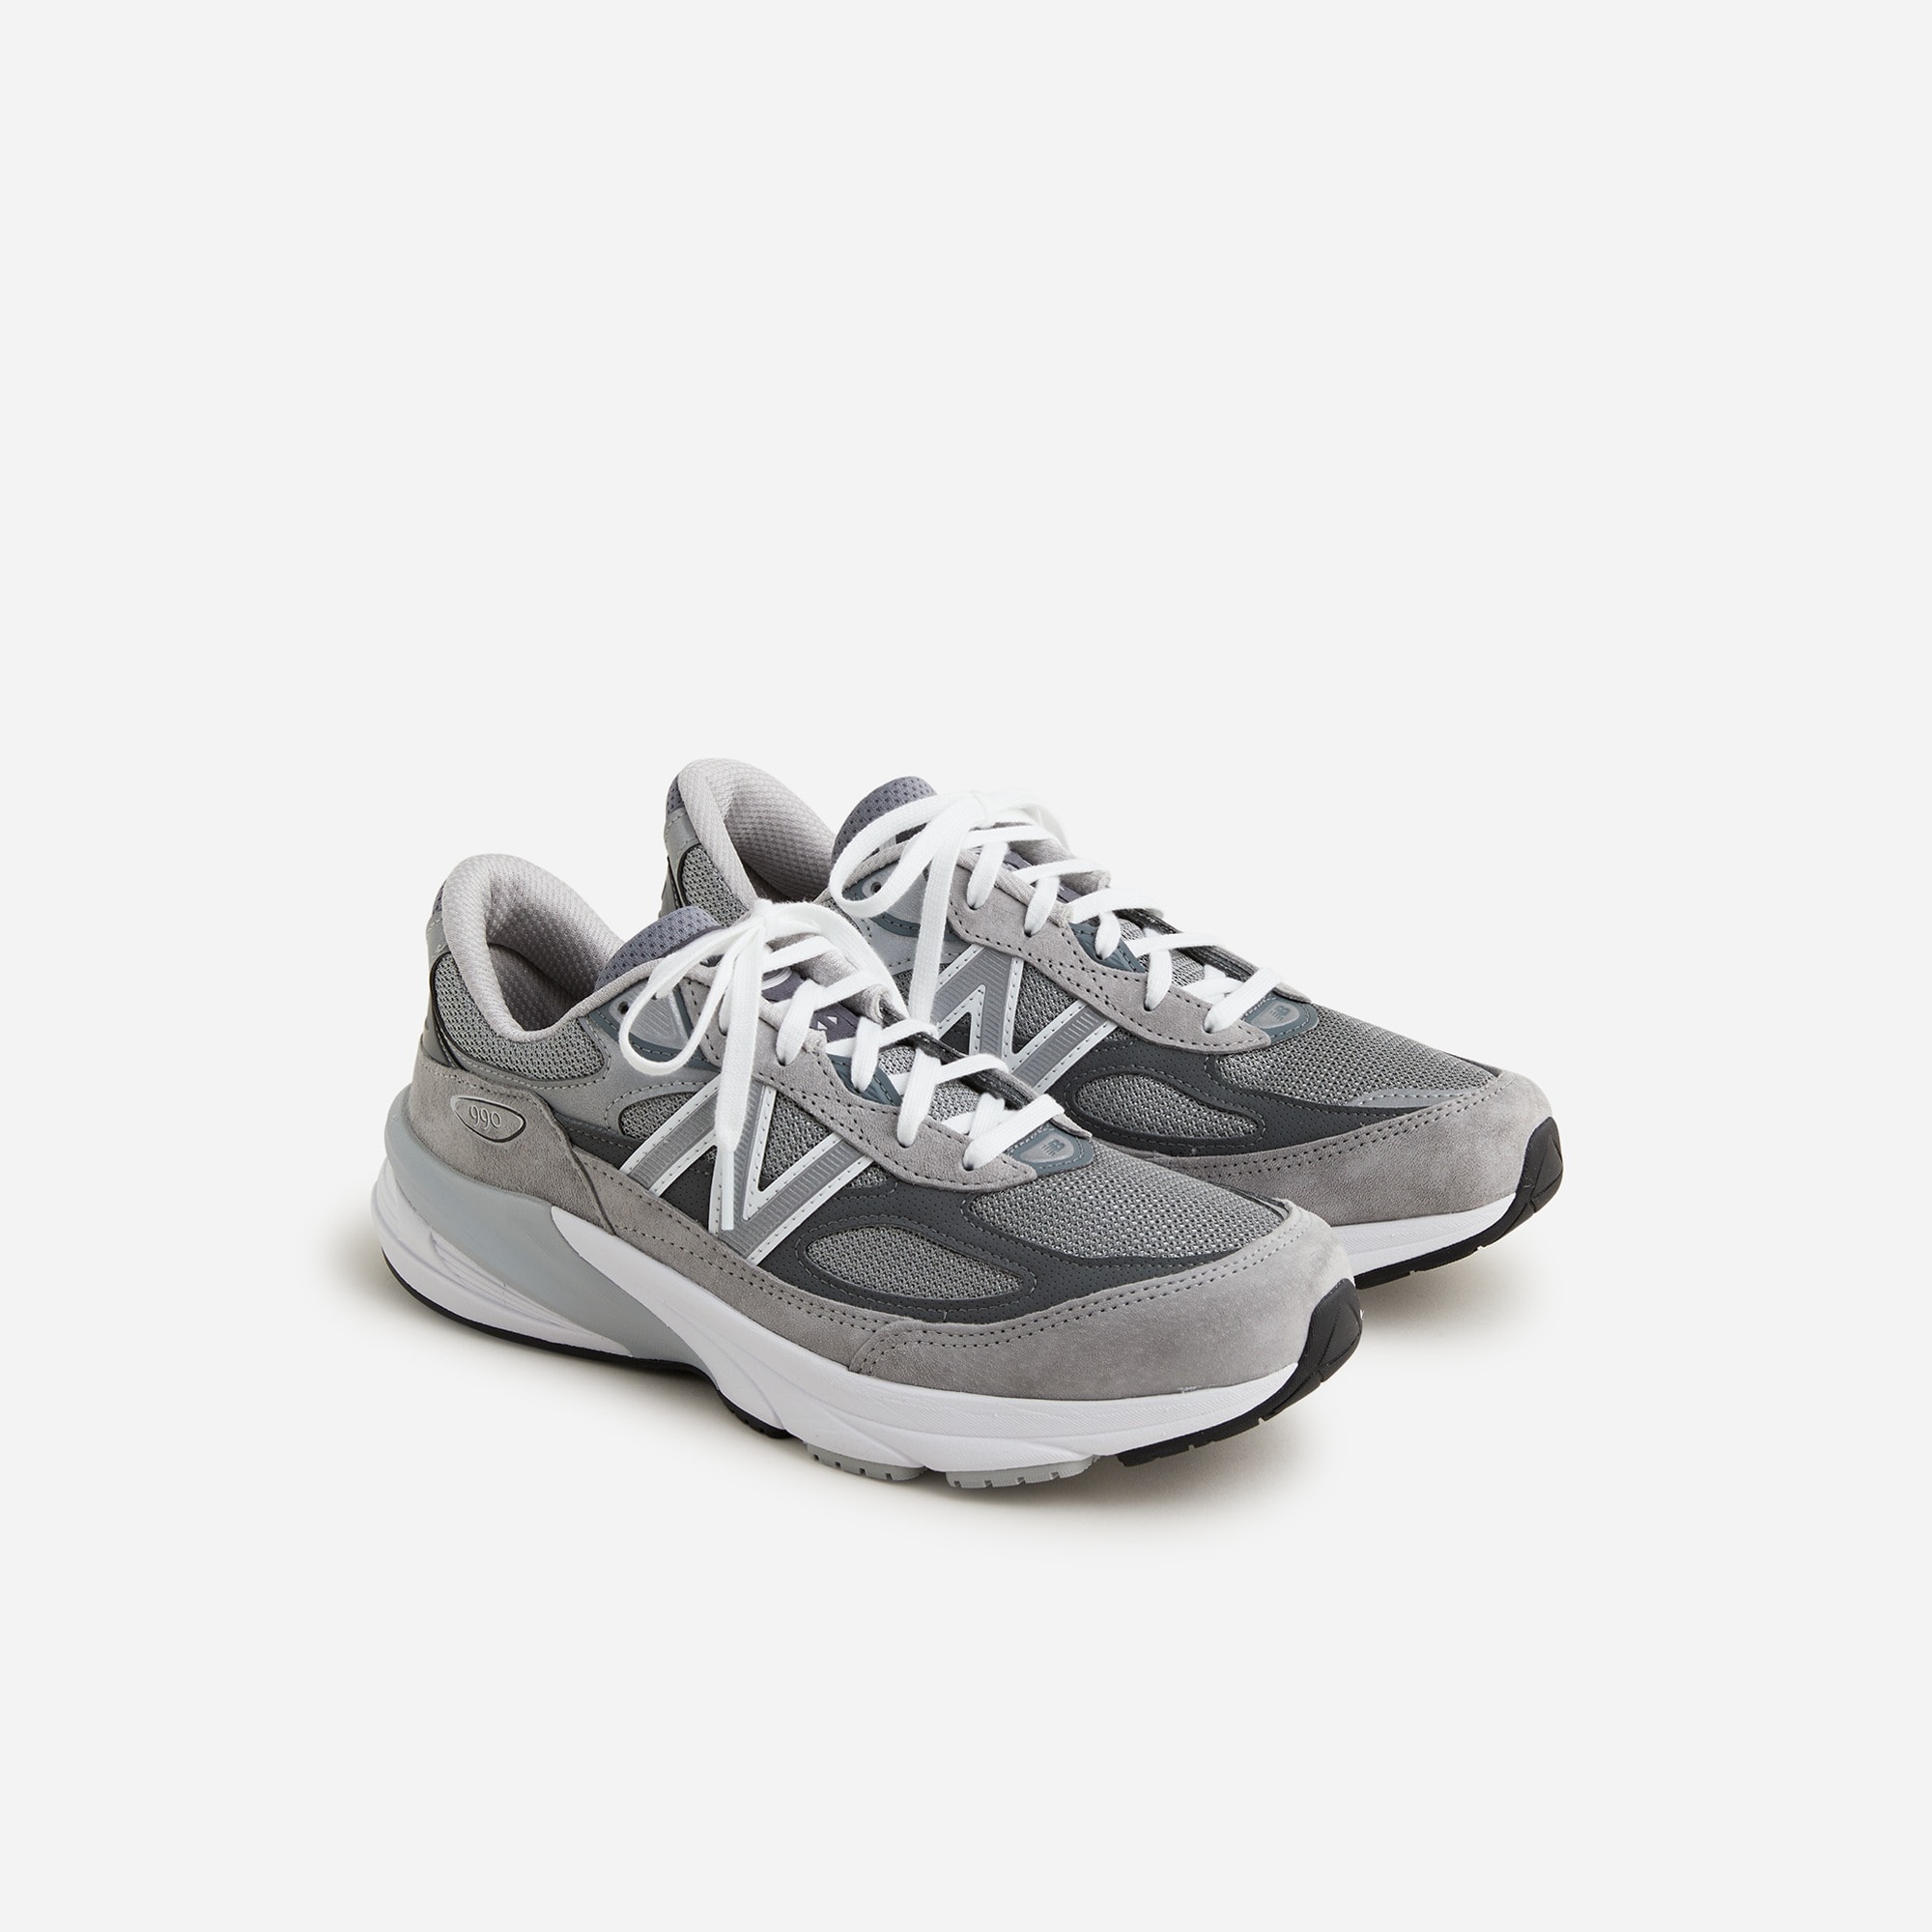 J.Crew: Made-in-the-USA New Balance® 990v6 Sneakers For Men